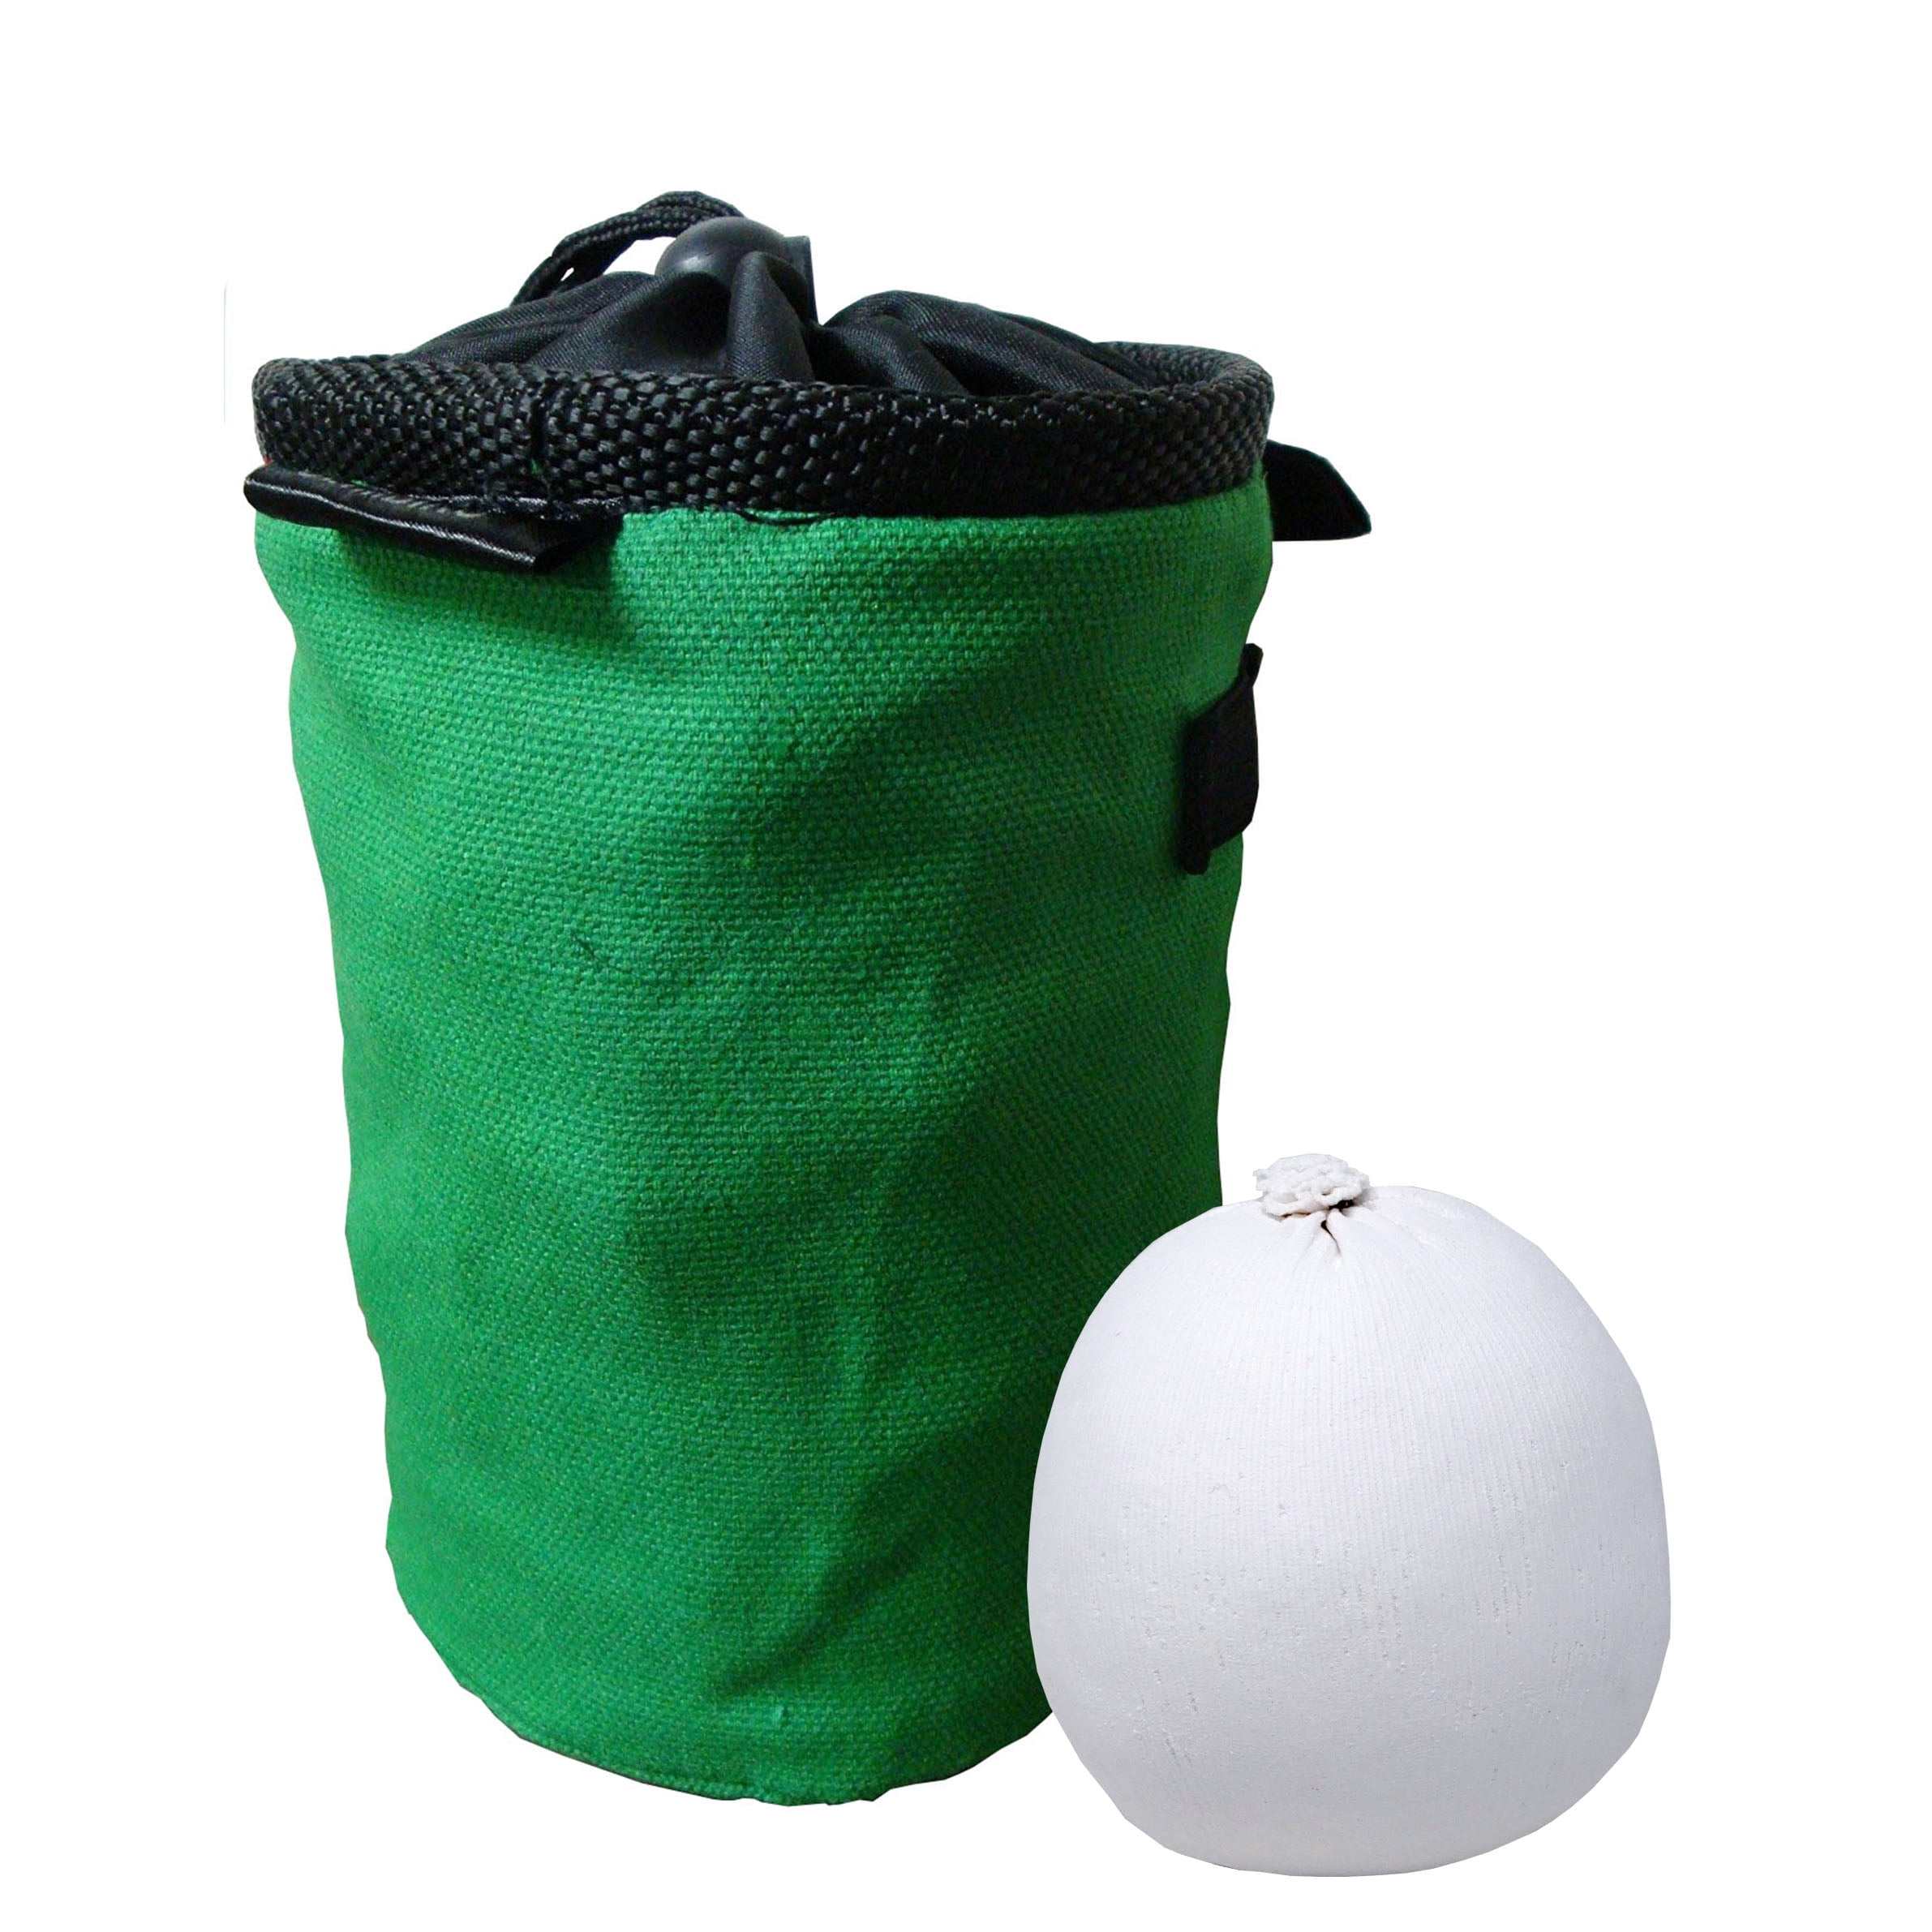 2oz, and Weight Lifting Z Athletic Chalk & Bag Combo for Gymnastics Climbing